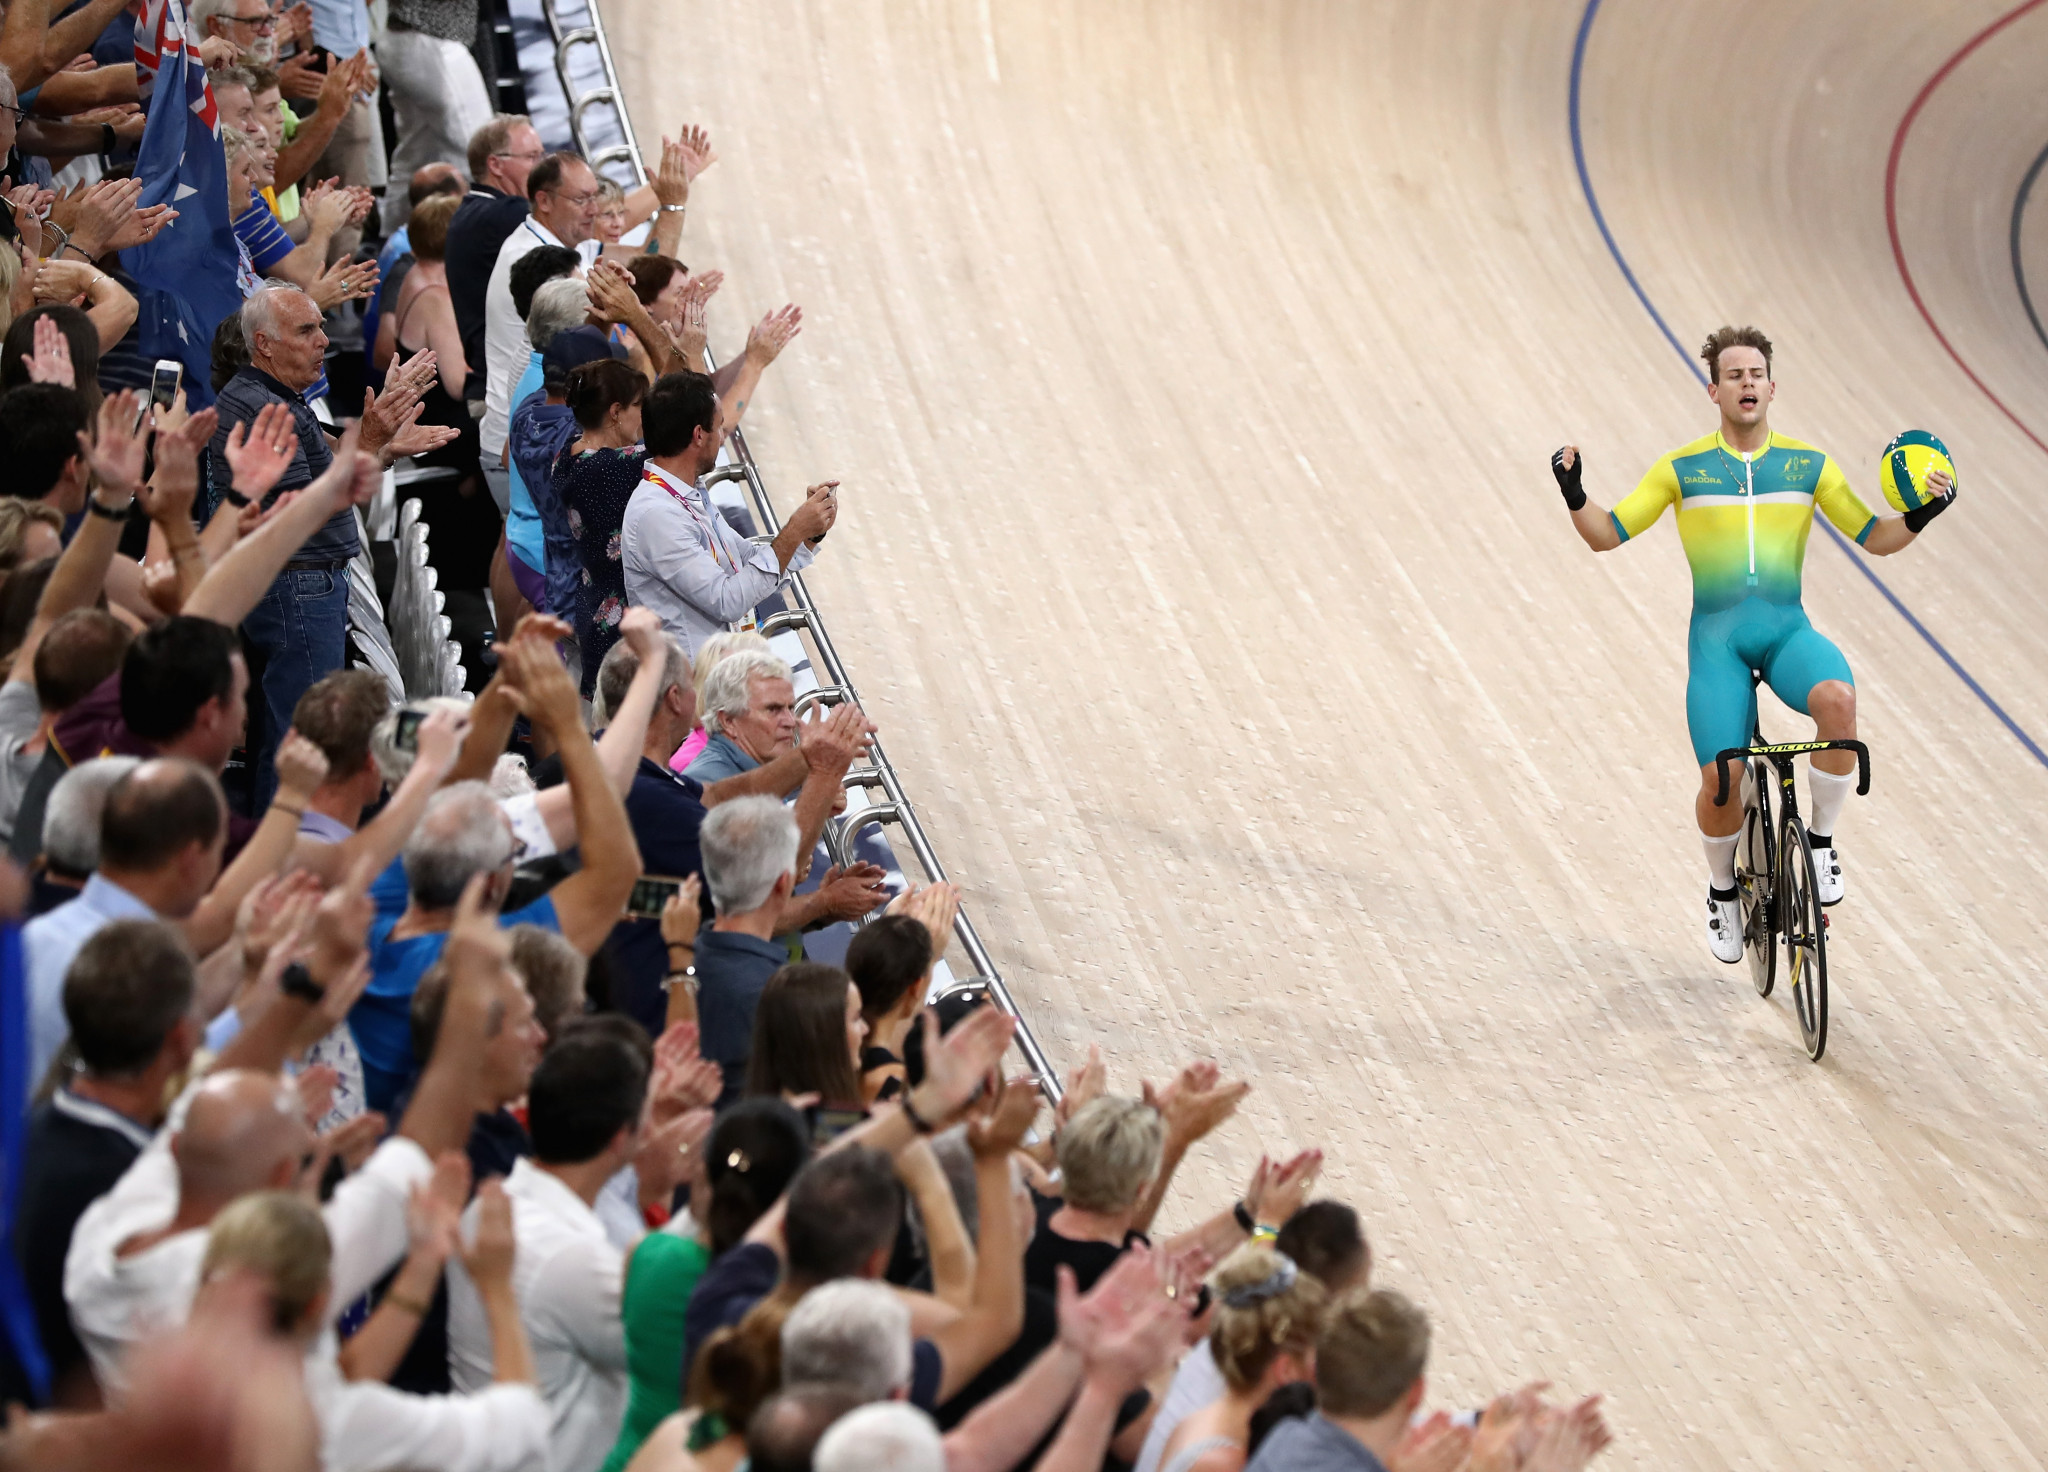 Brisbane hosted track cycling at the Gold Coast 2018 Commonwealth Games ©Getty Images